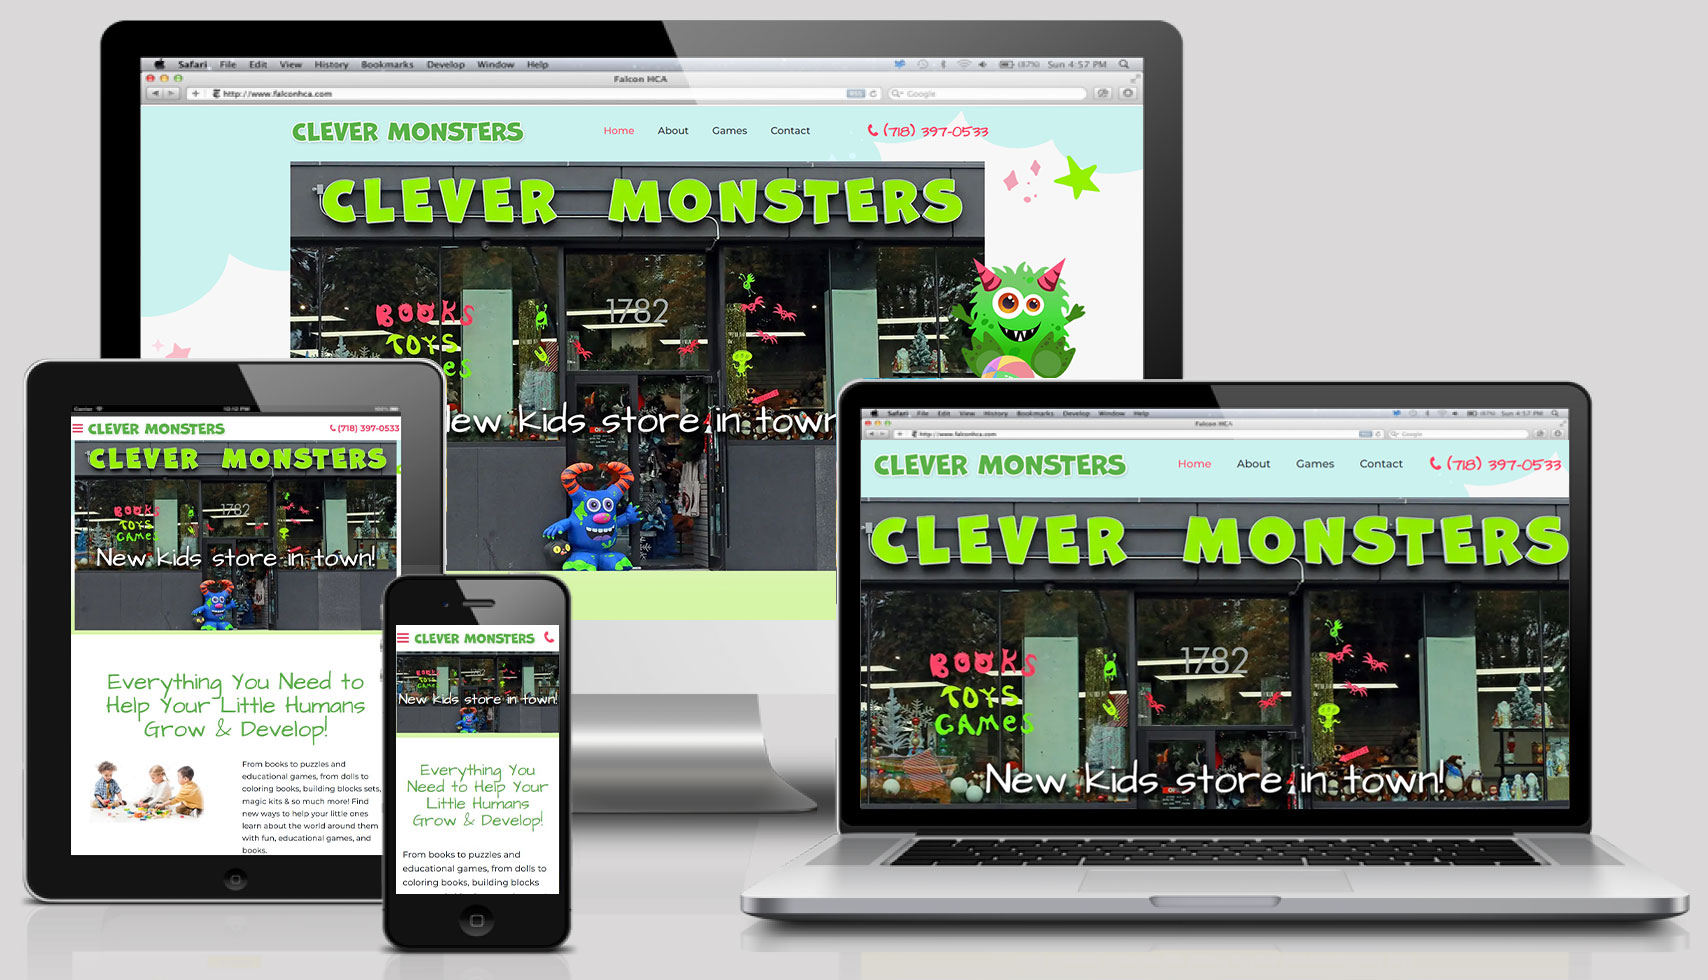 https://clevermonsters.com/